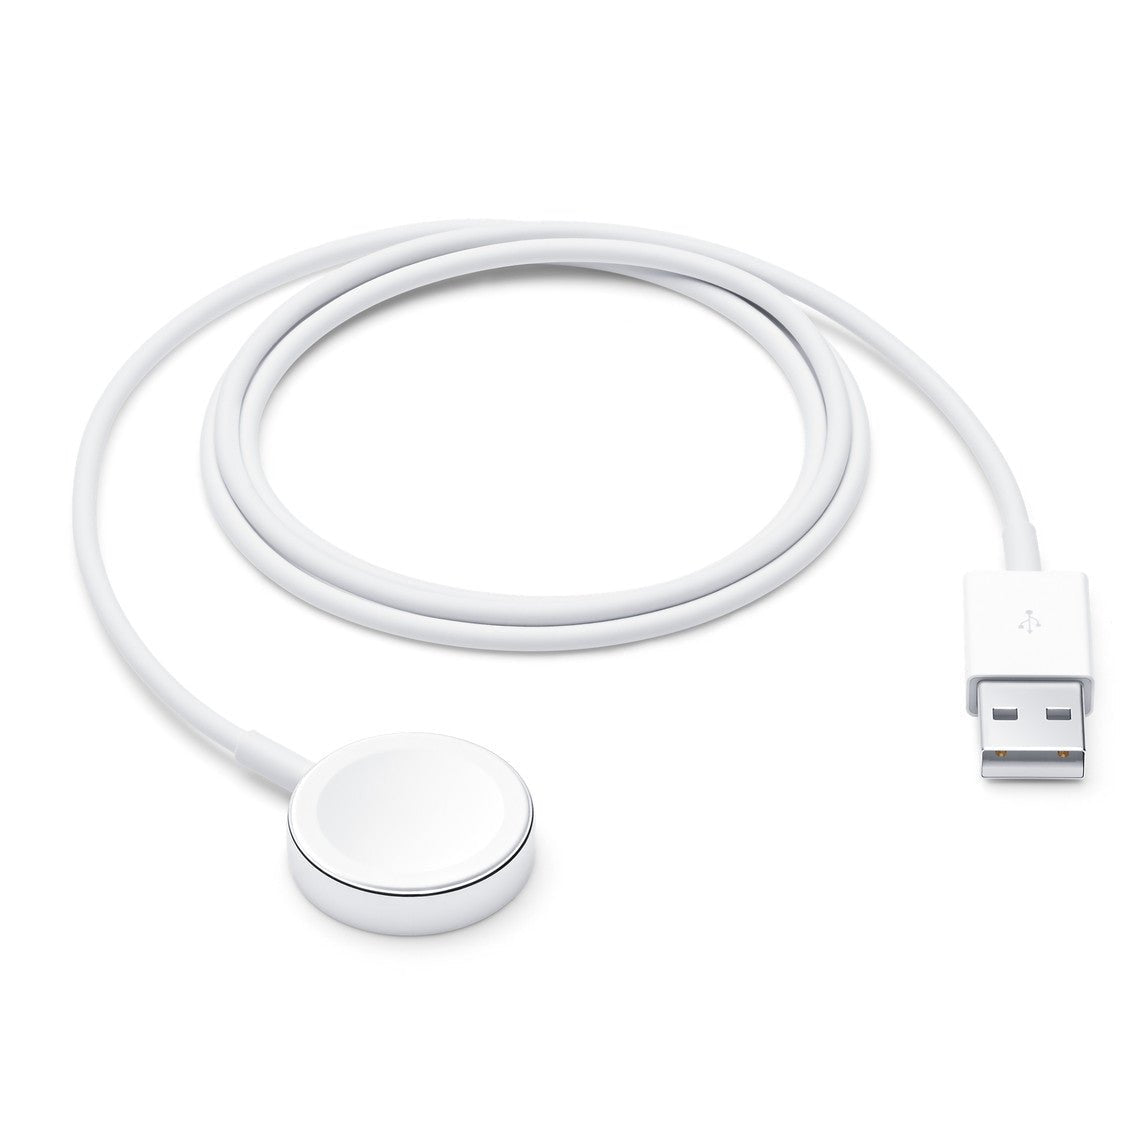 APPLE Watch Magnetic Charger to USB-A Cable (1m) - Level UpAppleCharging Cable190199291102